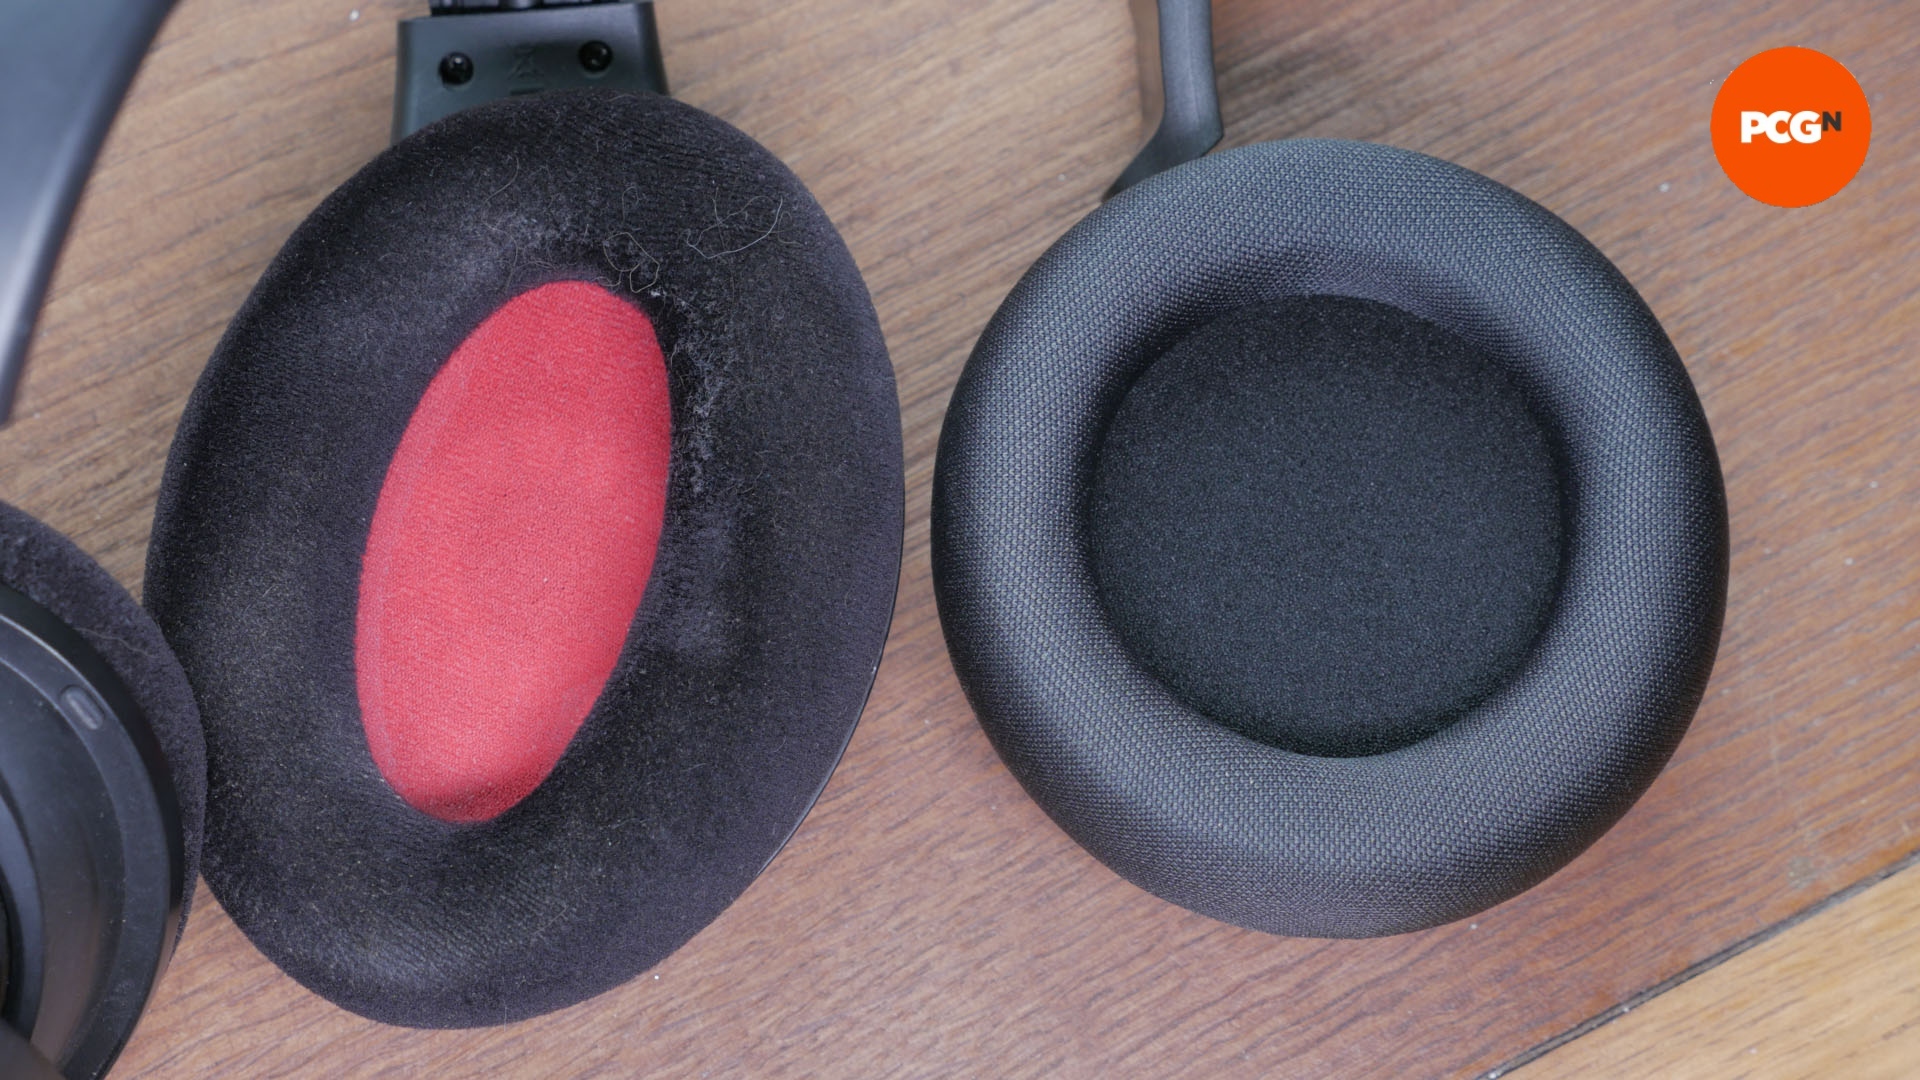 Corsair Virtuoso Pro review image showing the earcups.